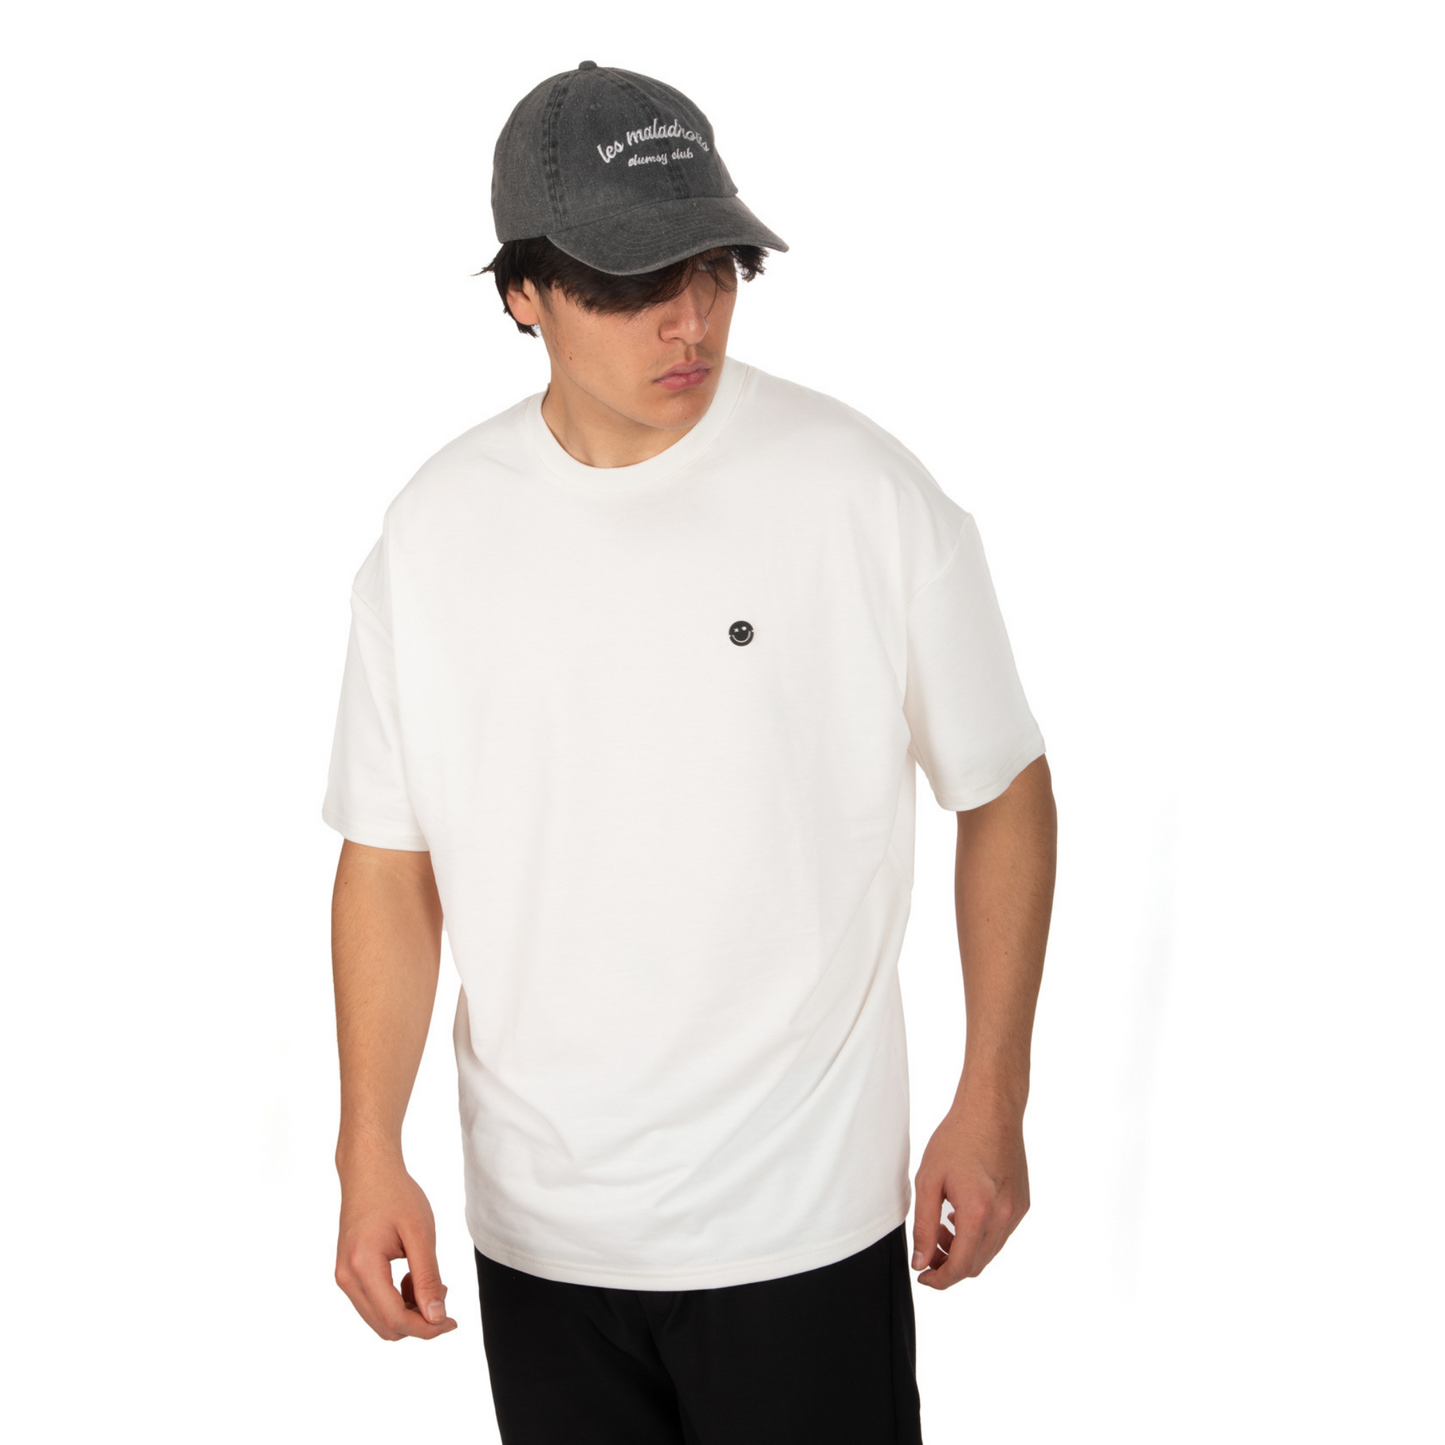 Washed Grey Hat – Les Maladroits Clumsy Club front view on male model with white t-shirt